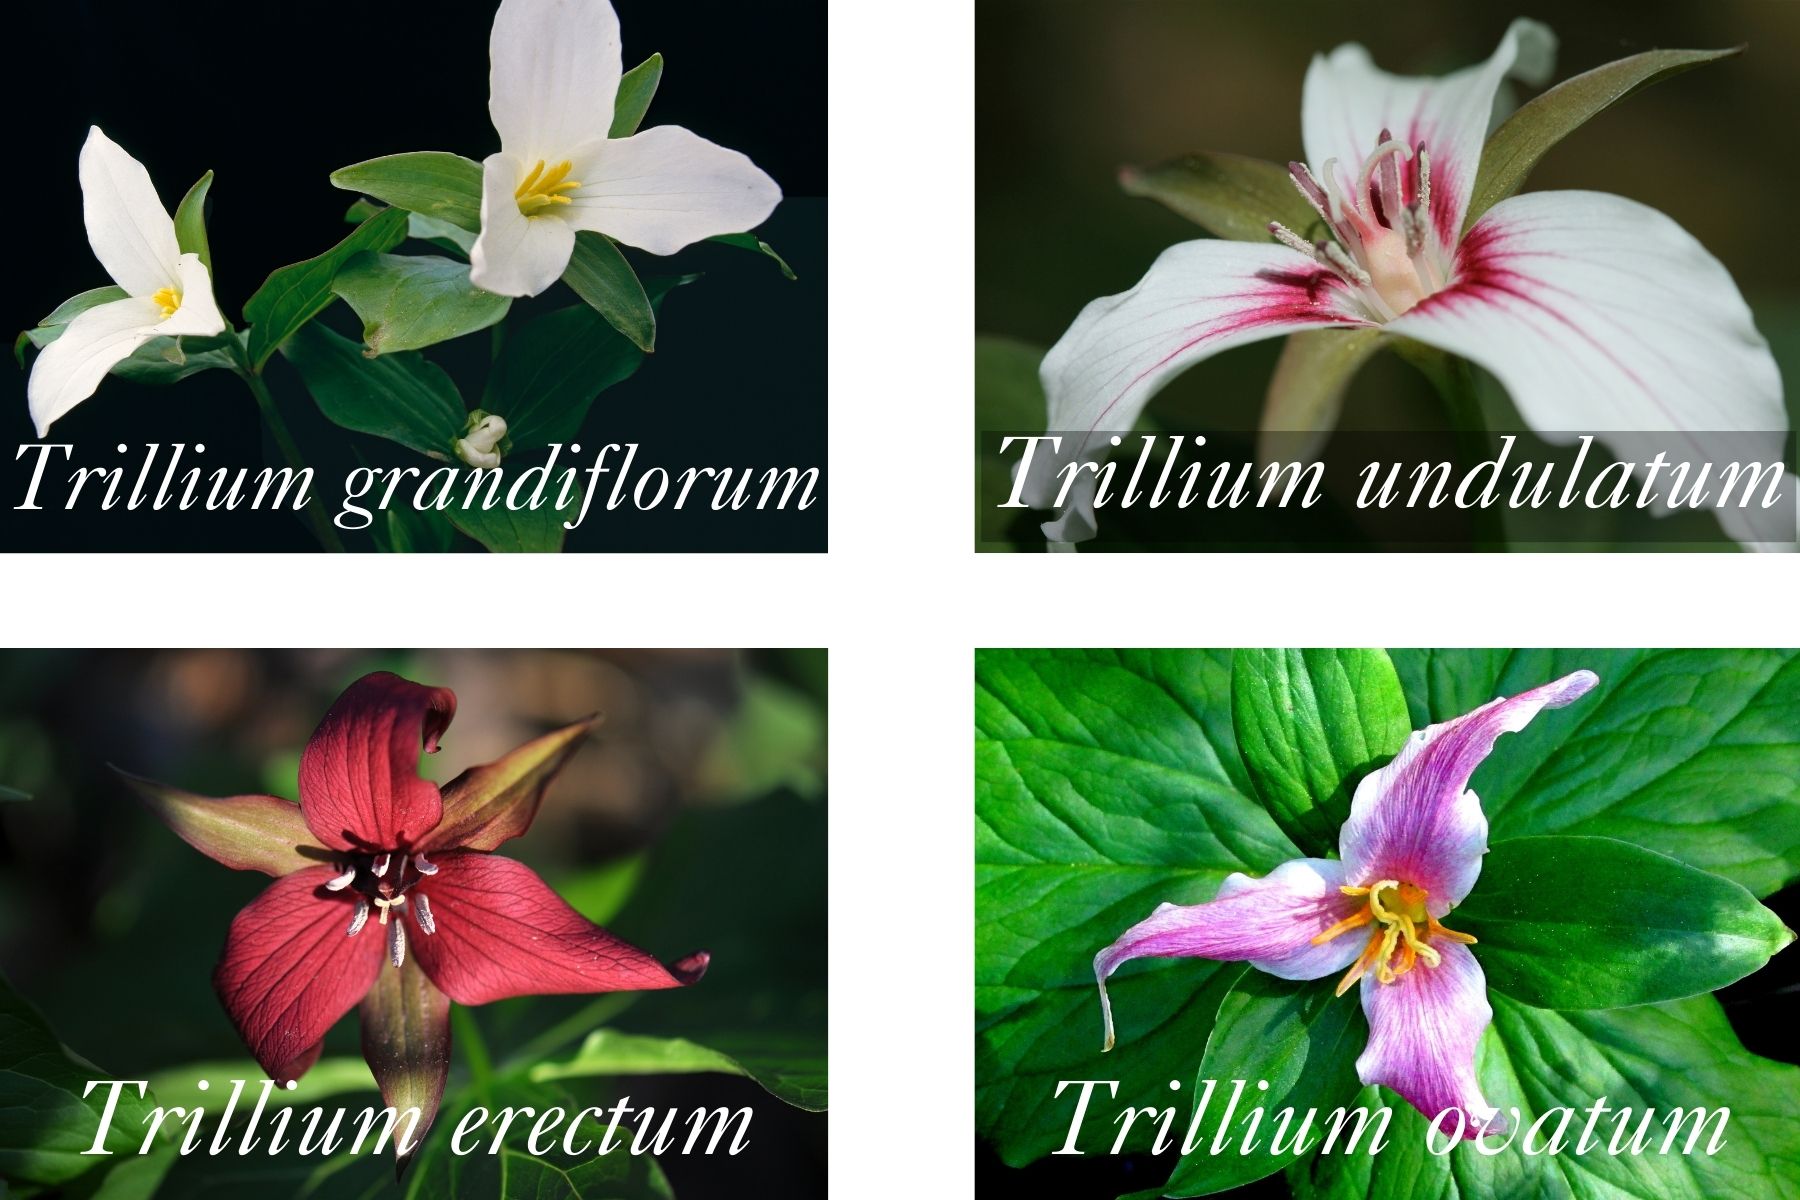 Various species of white, red, and pink Trillium. A three leafed flower